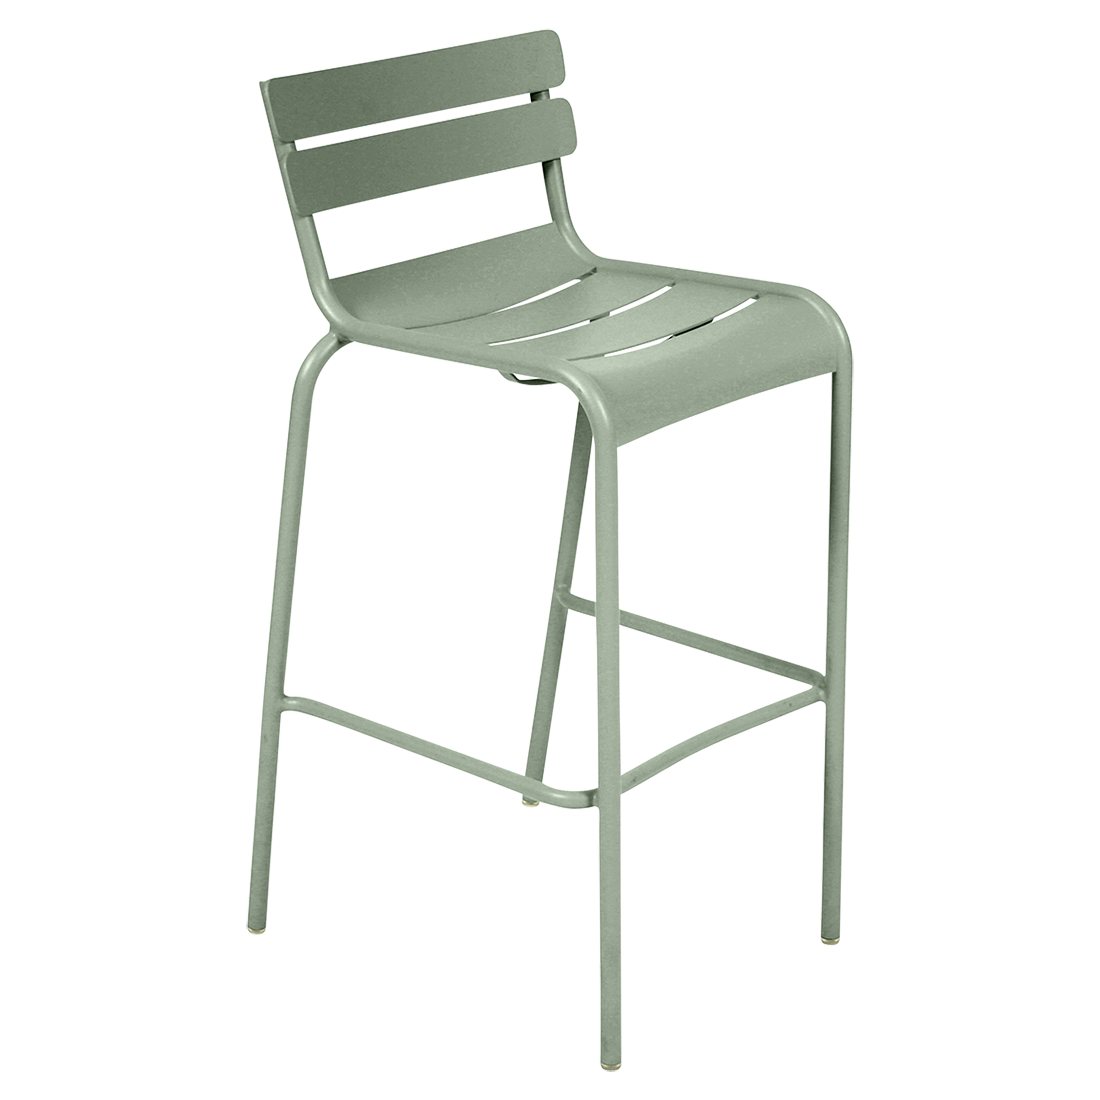 LUXEMBOURG / 4103 HIGH STOOL